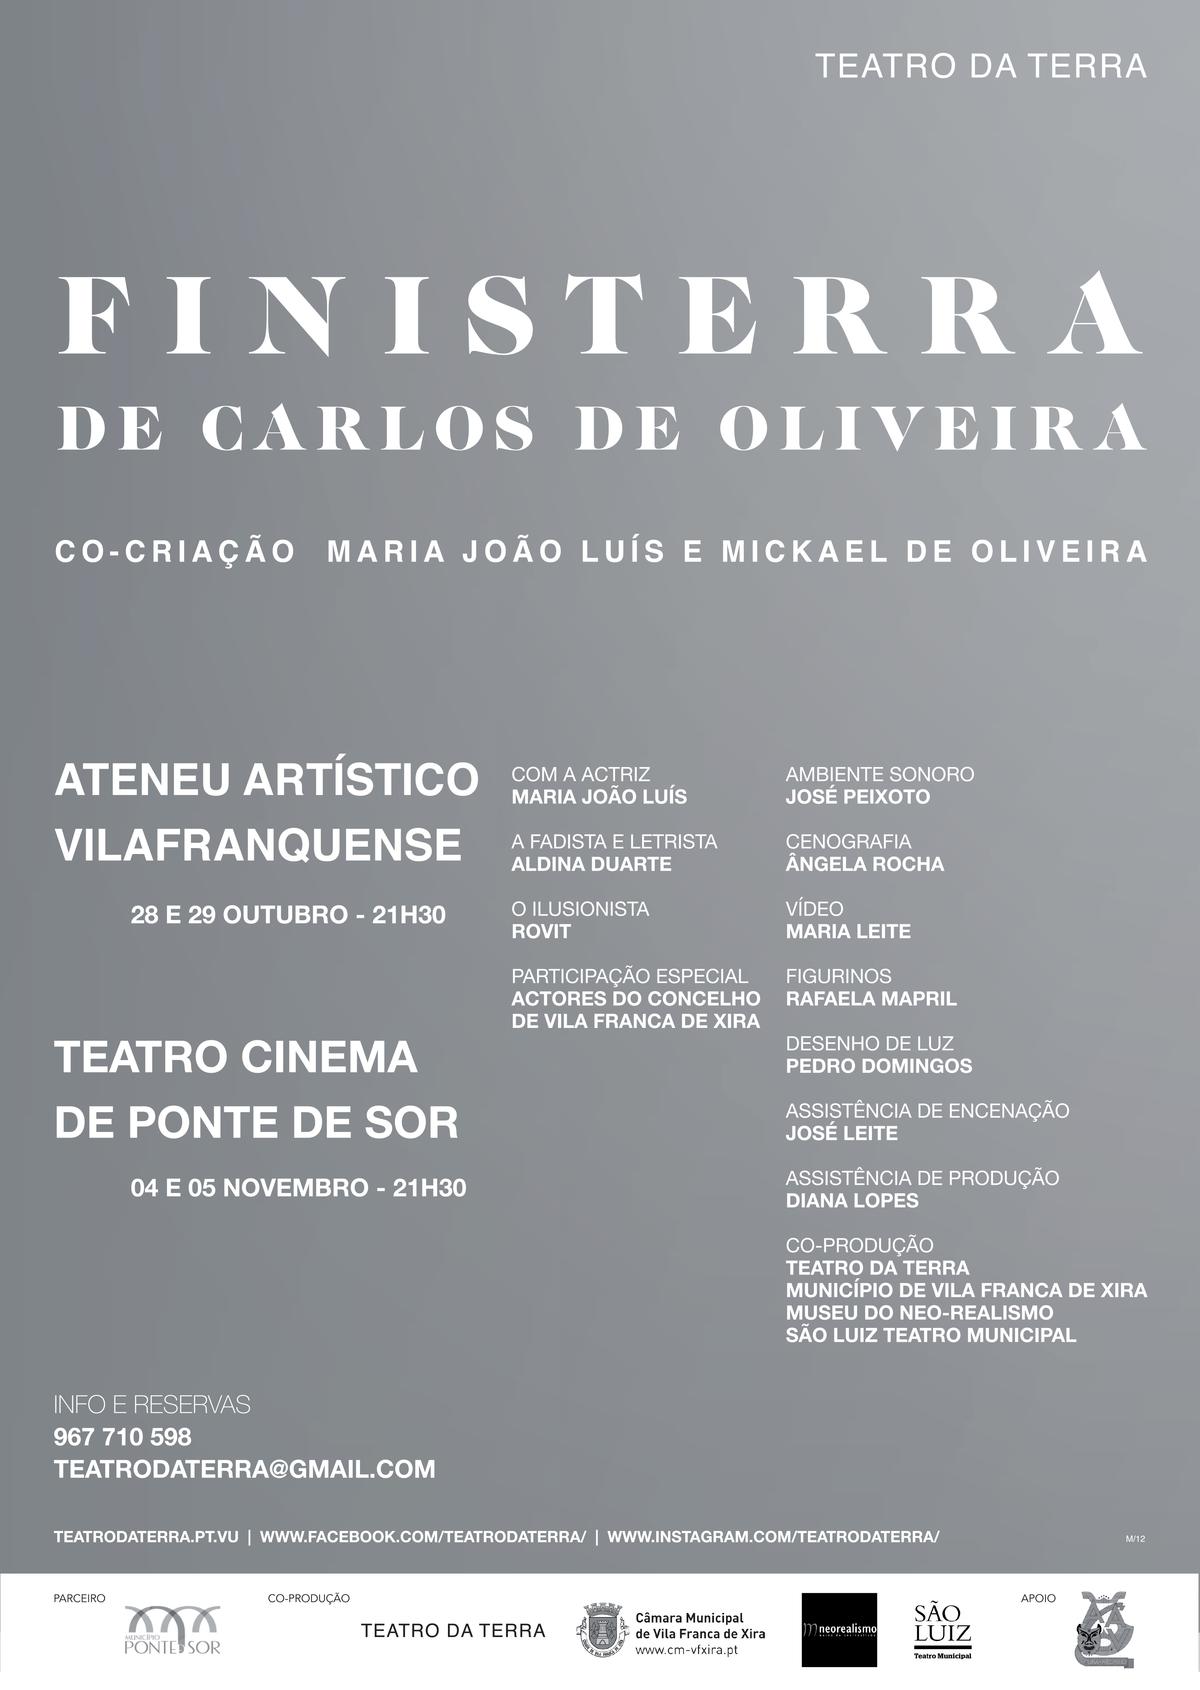 Finisterra_a33